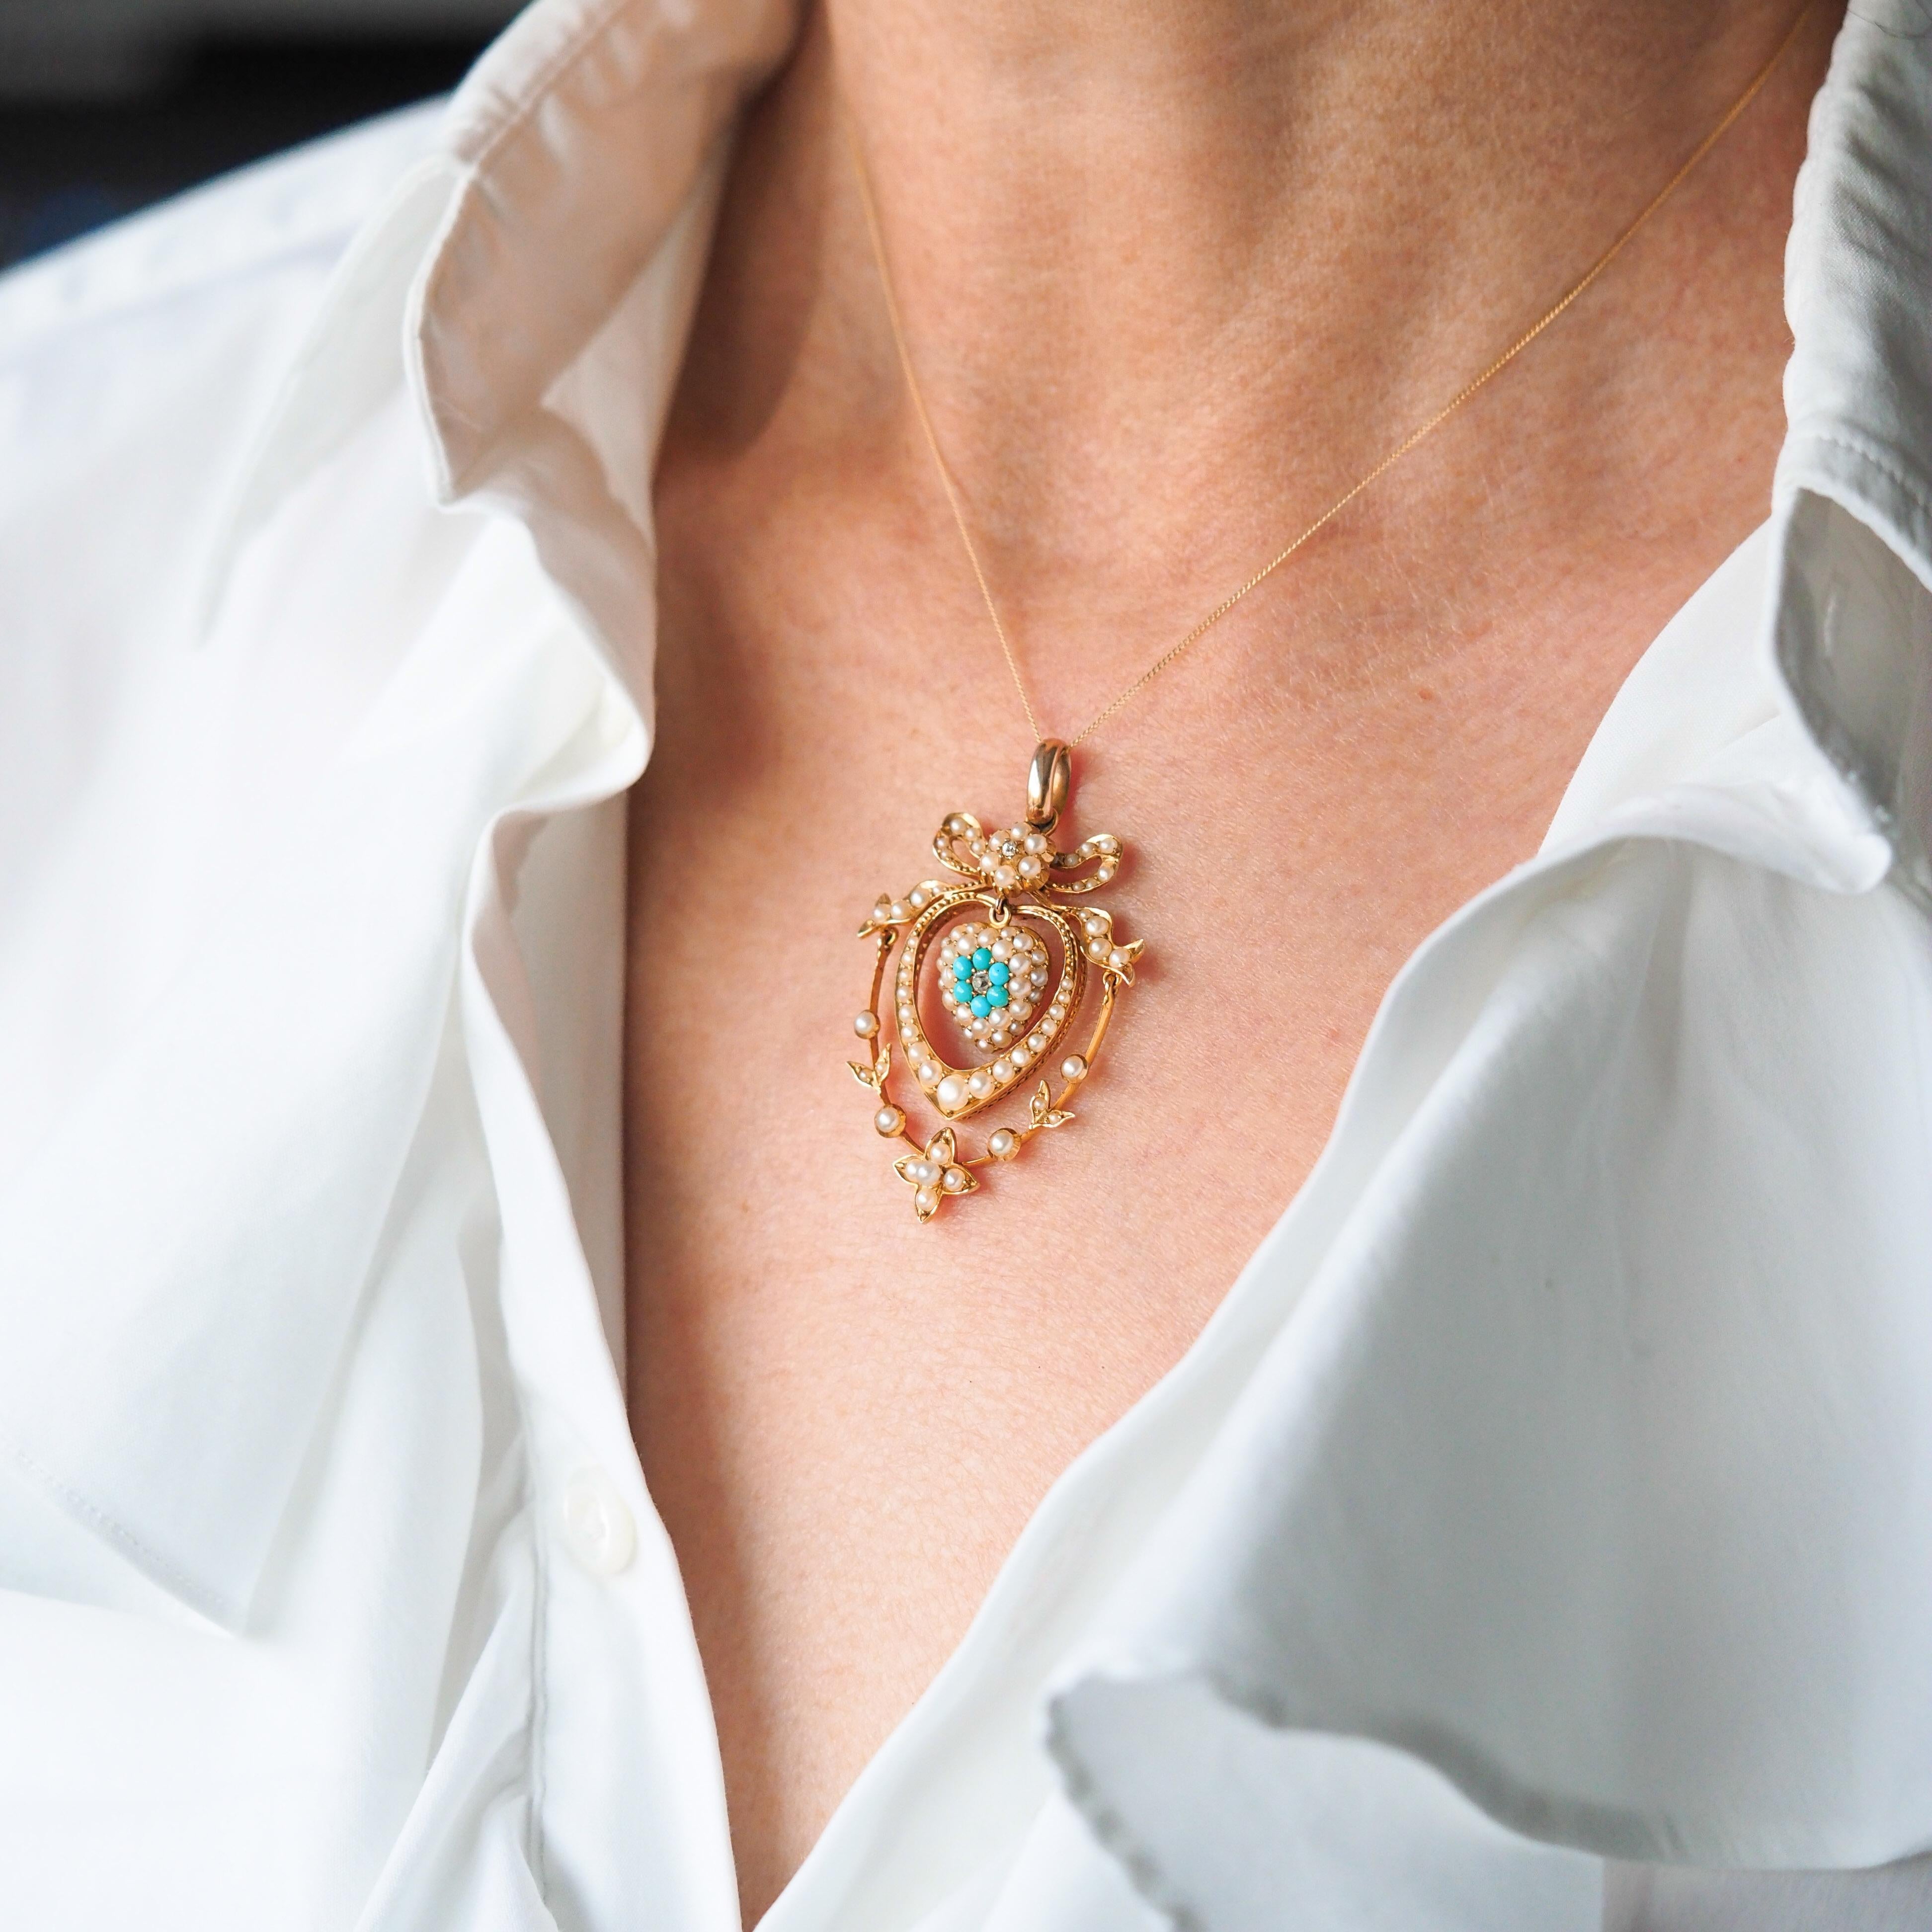 Antique Edwardian 15K Gold Turquoise Diamond & Seed Pearl Pendant Necklace c1910 For Sale 2